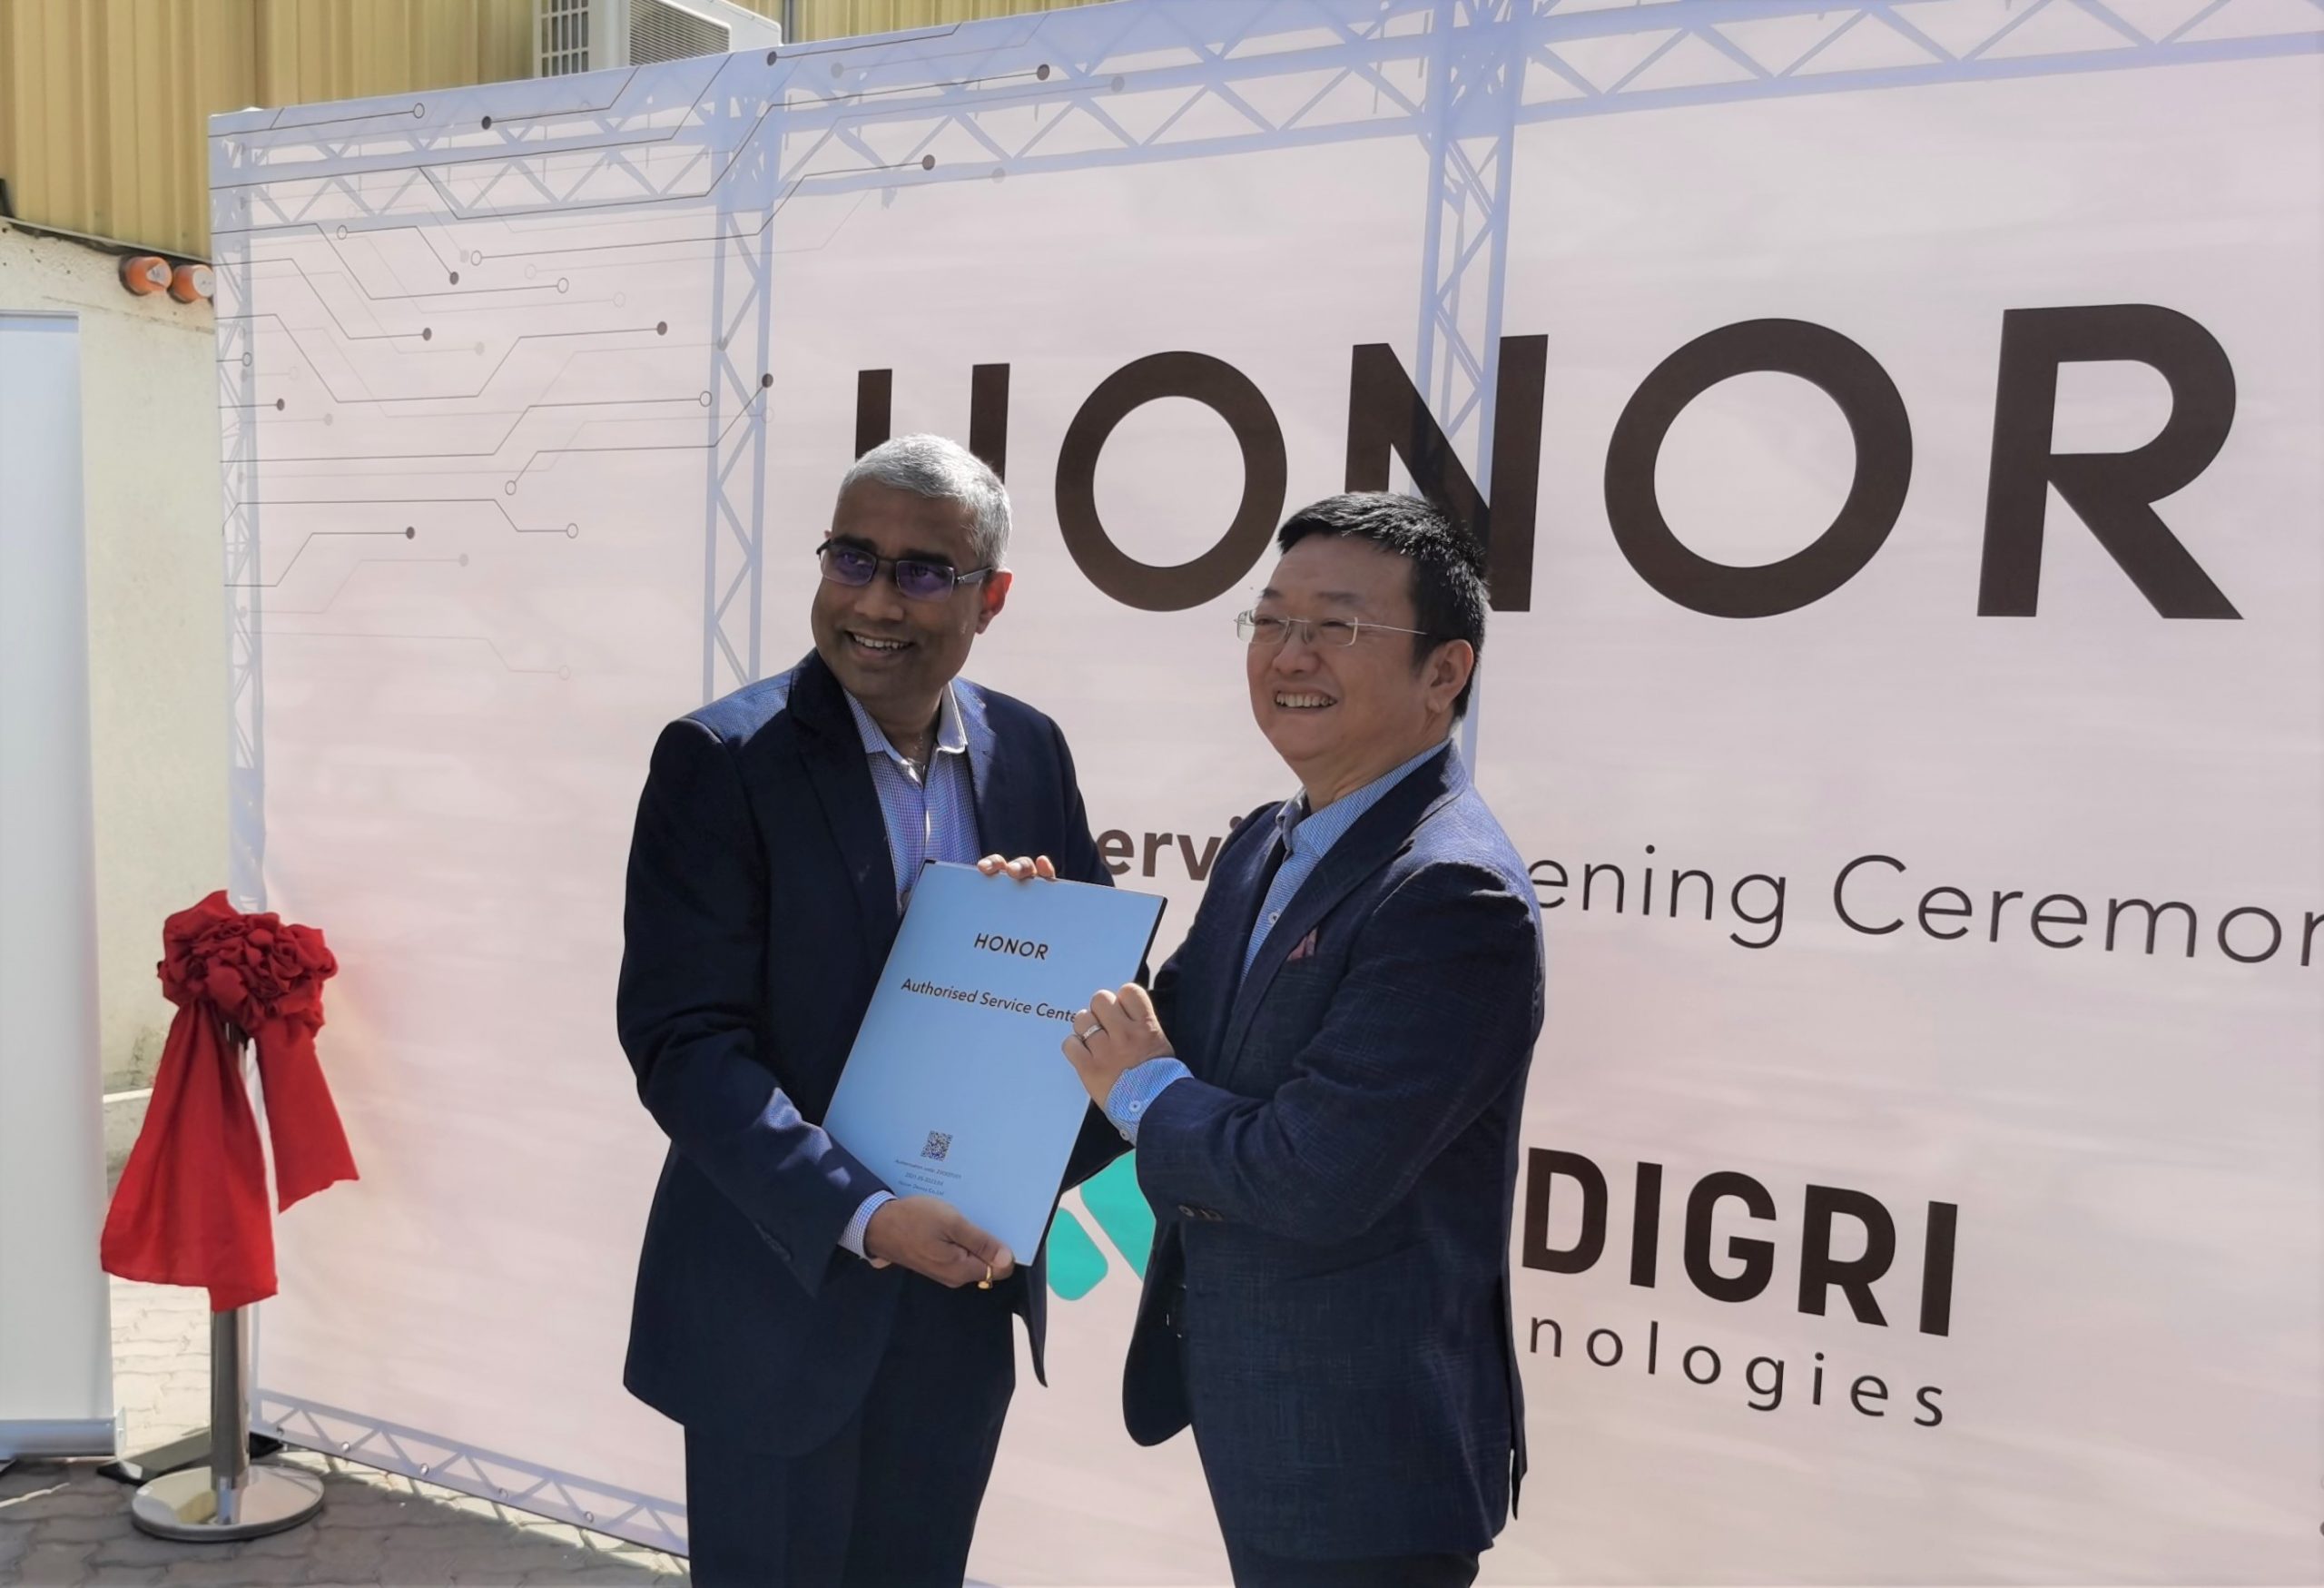 HONOR Partners with Pedigri Technologies